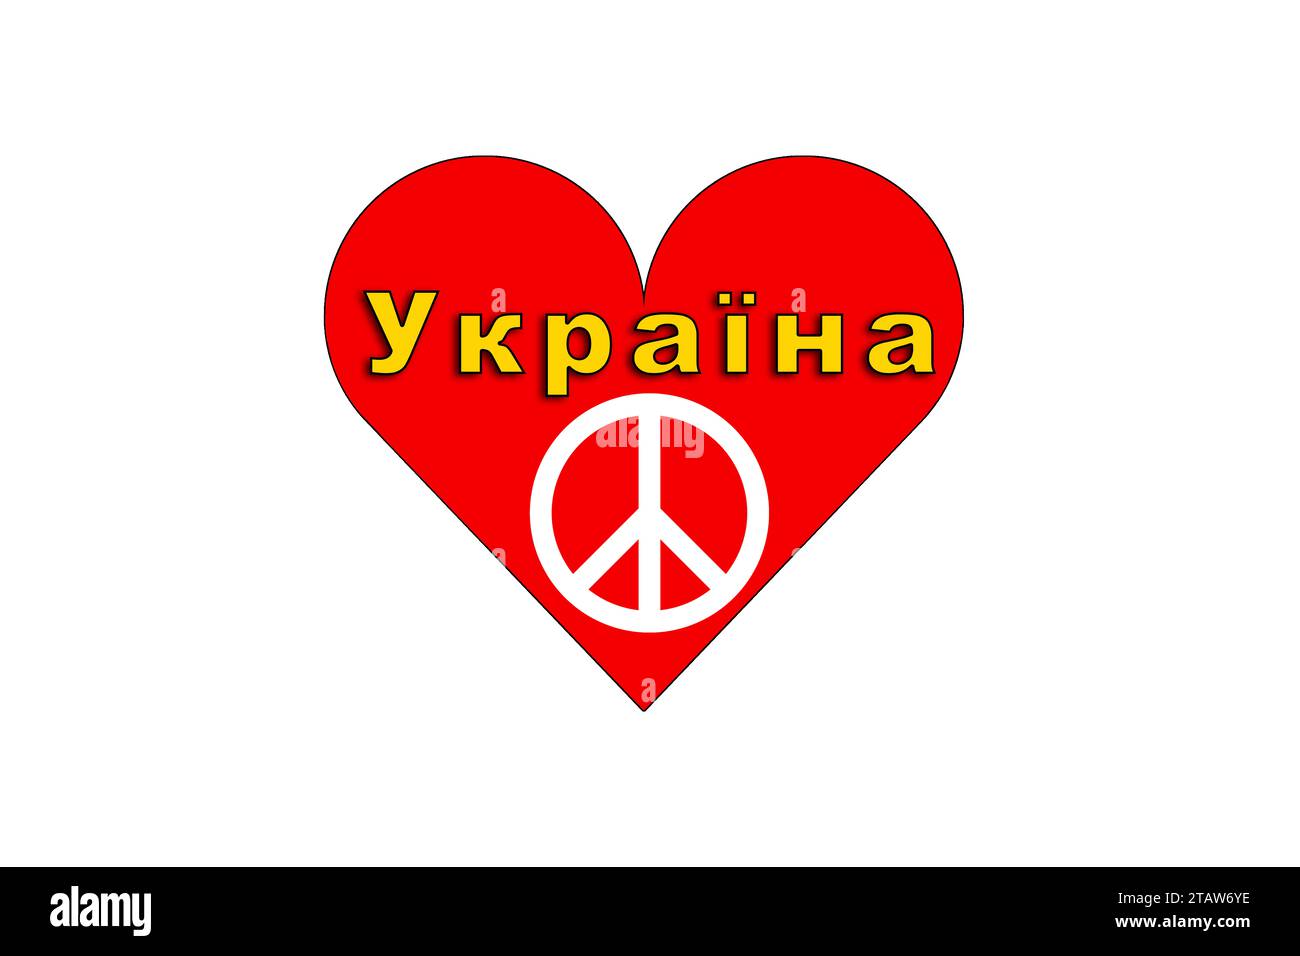 Ukraine, the name of the country, illustrated graphics of the peace logo and heart for the Ukrainian people Stock Photo